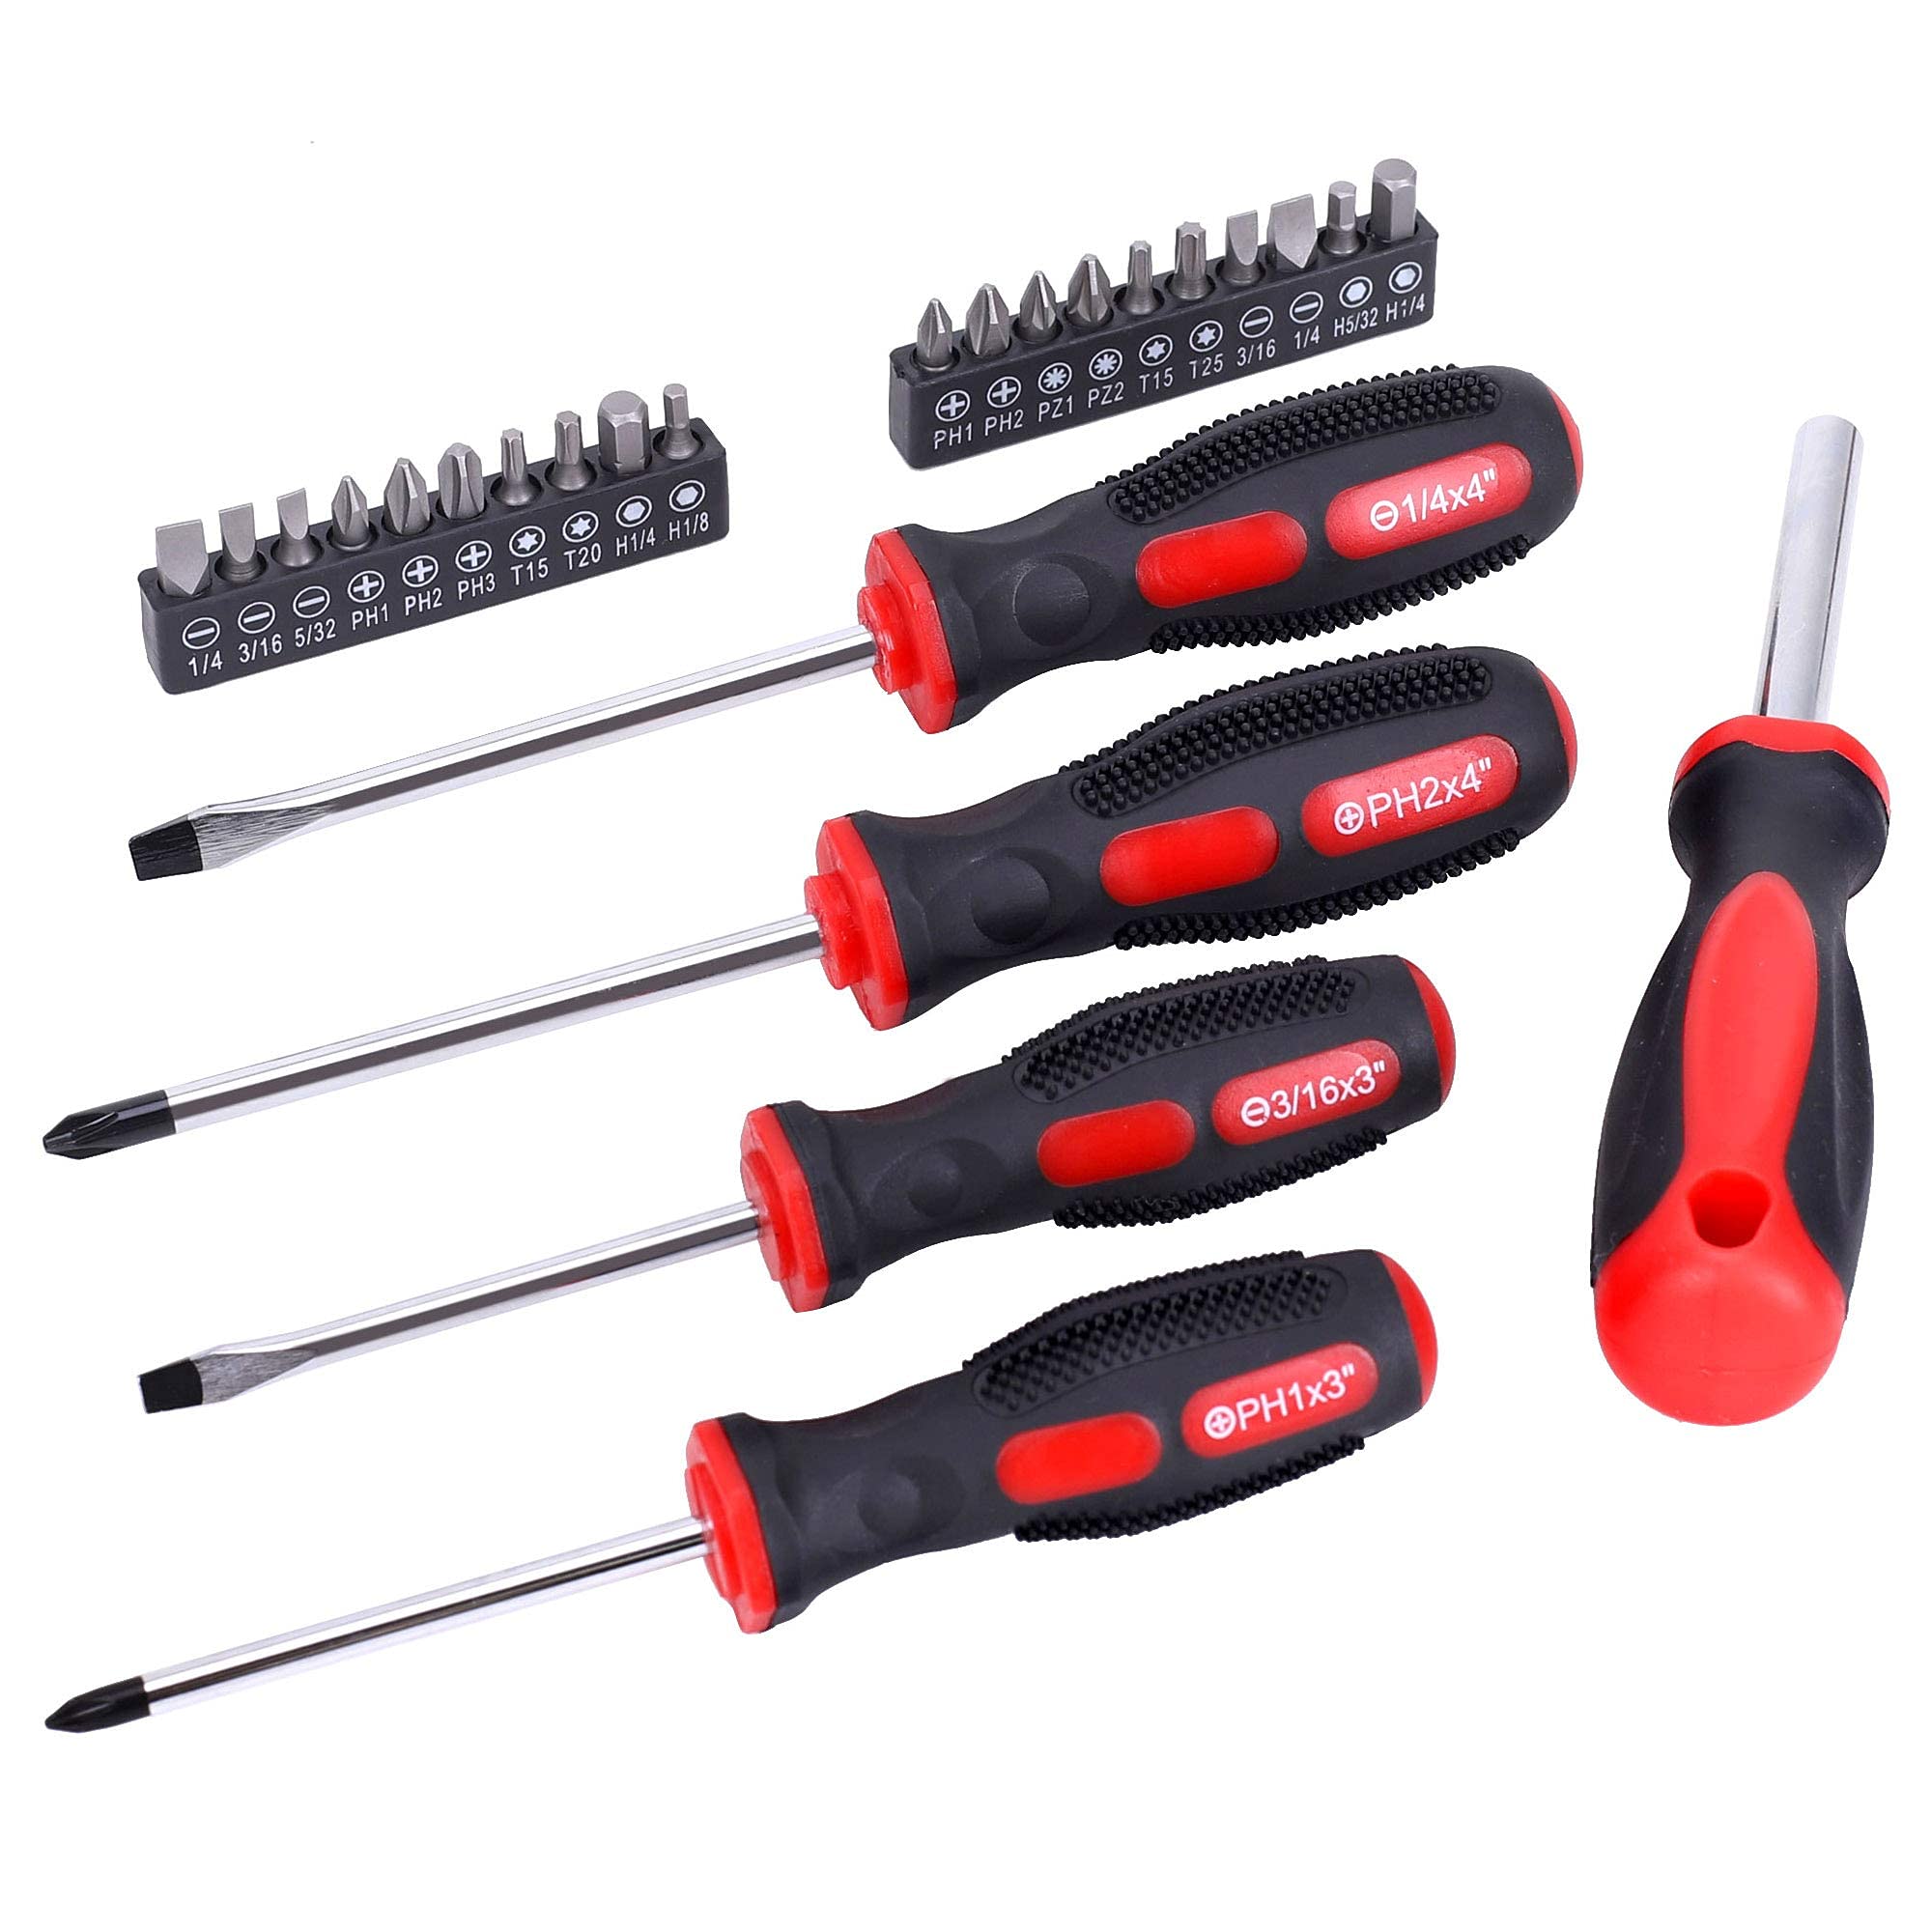 FASTPRO 215-Piece Home Repairing Tool Set with 12-Inch Wide Mouth Open Storage Bag,Household Hand Tool Kit,Red